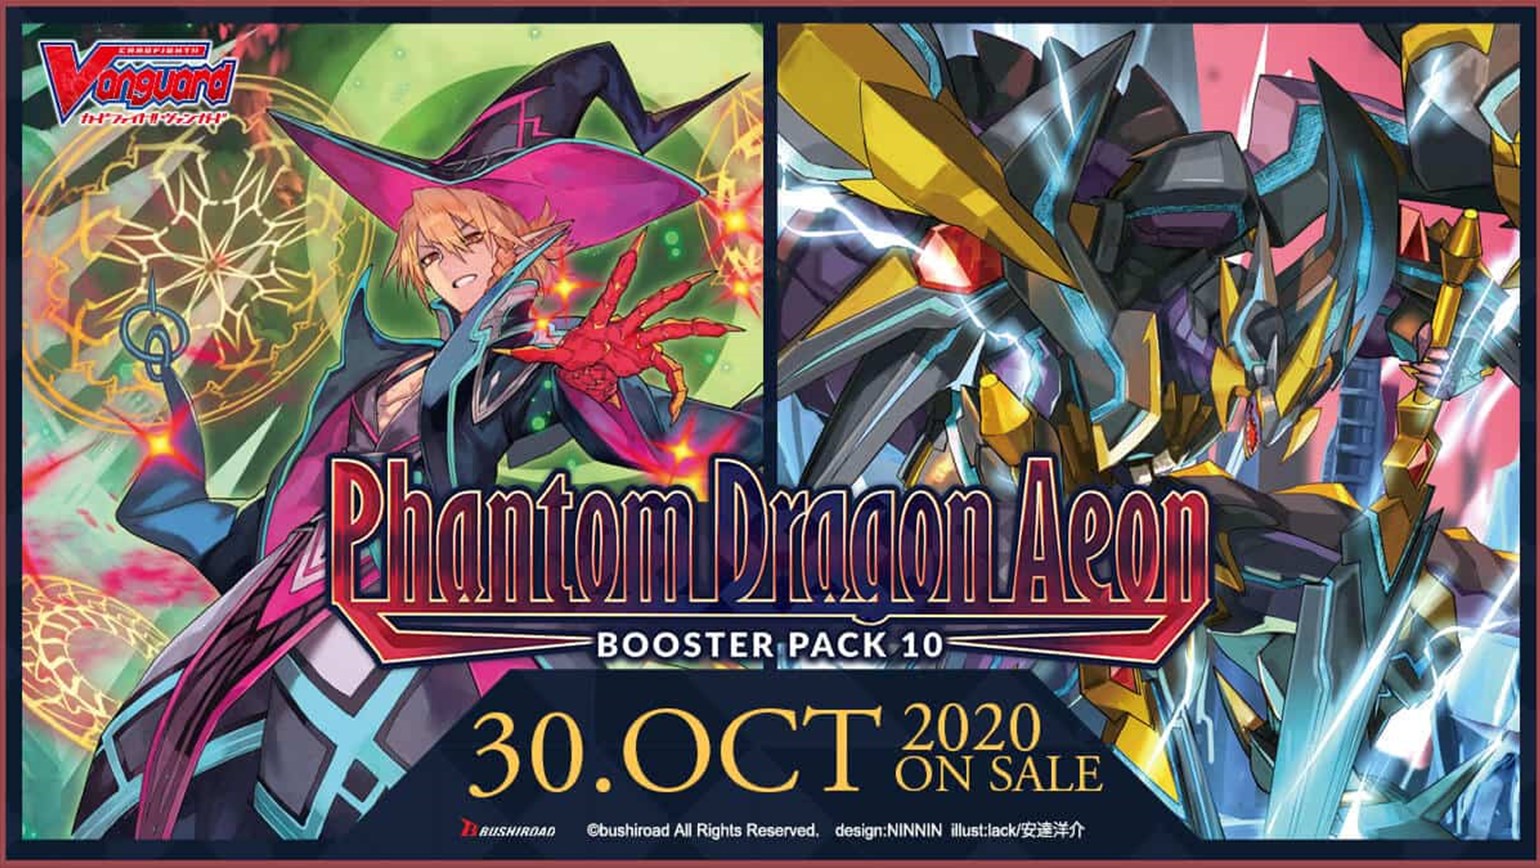 New English Edition Cardfight!! Vanguard Booster Pack Vol. 10: Phantom Dragon Aeon is Coming to Stores on October 30th!